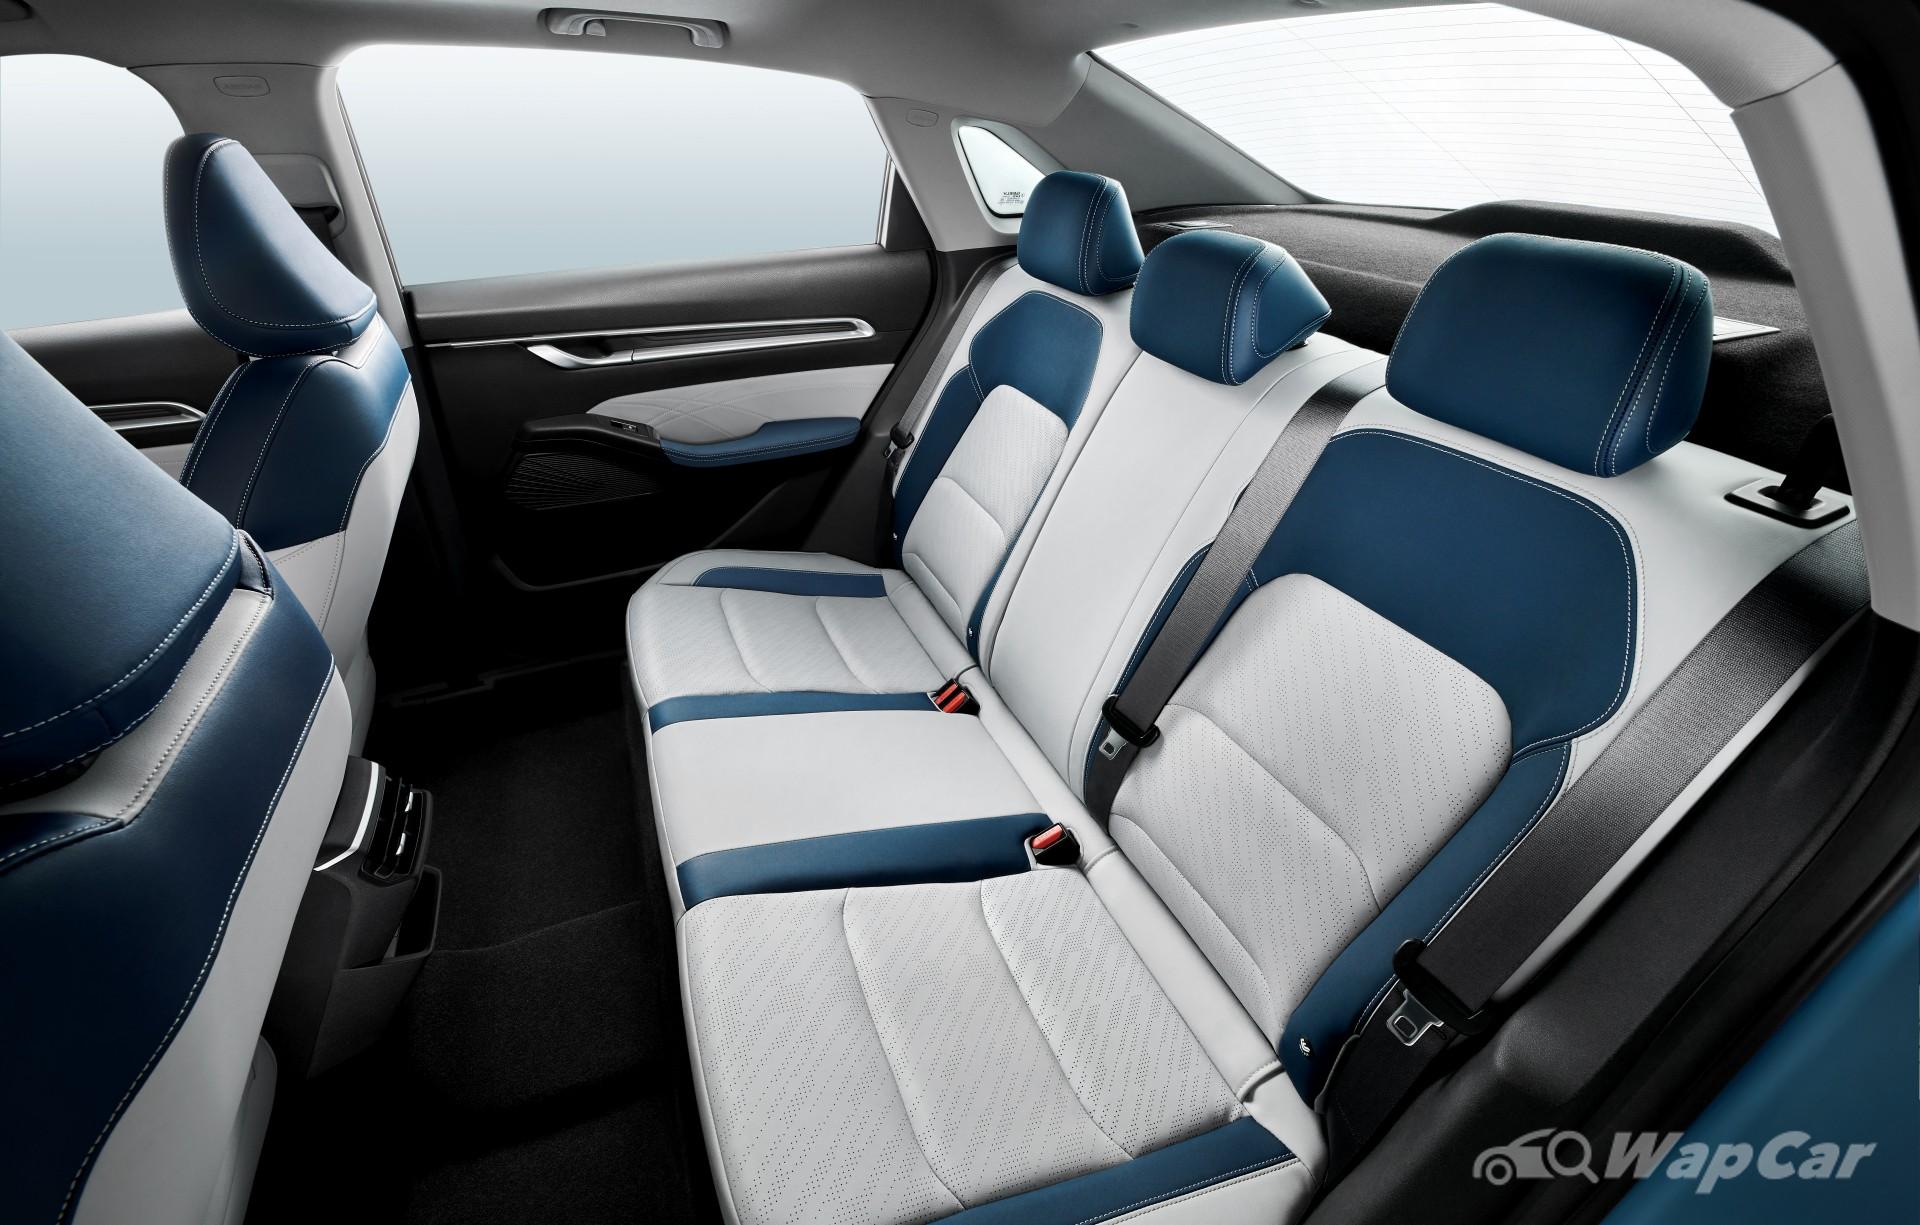 Geely Emgrand GT interior - Seats